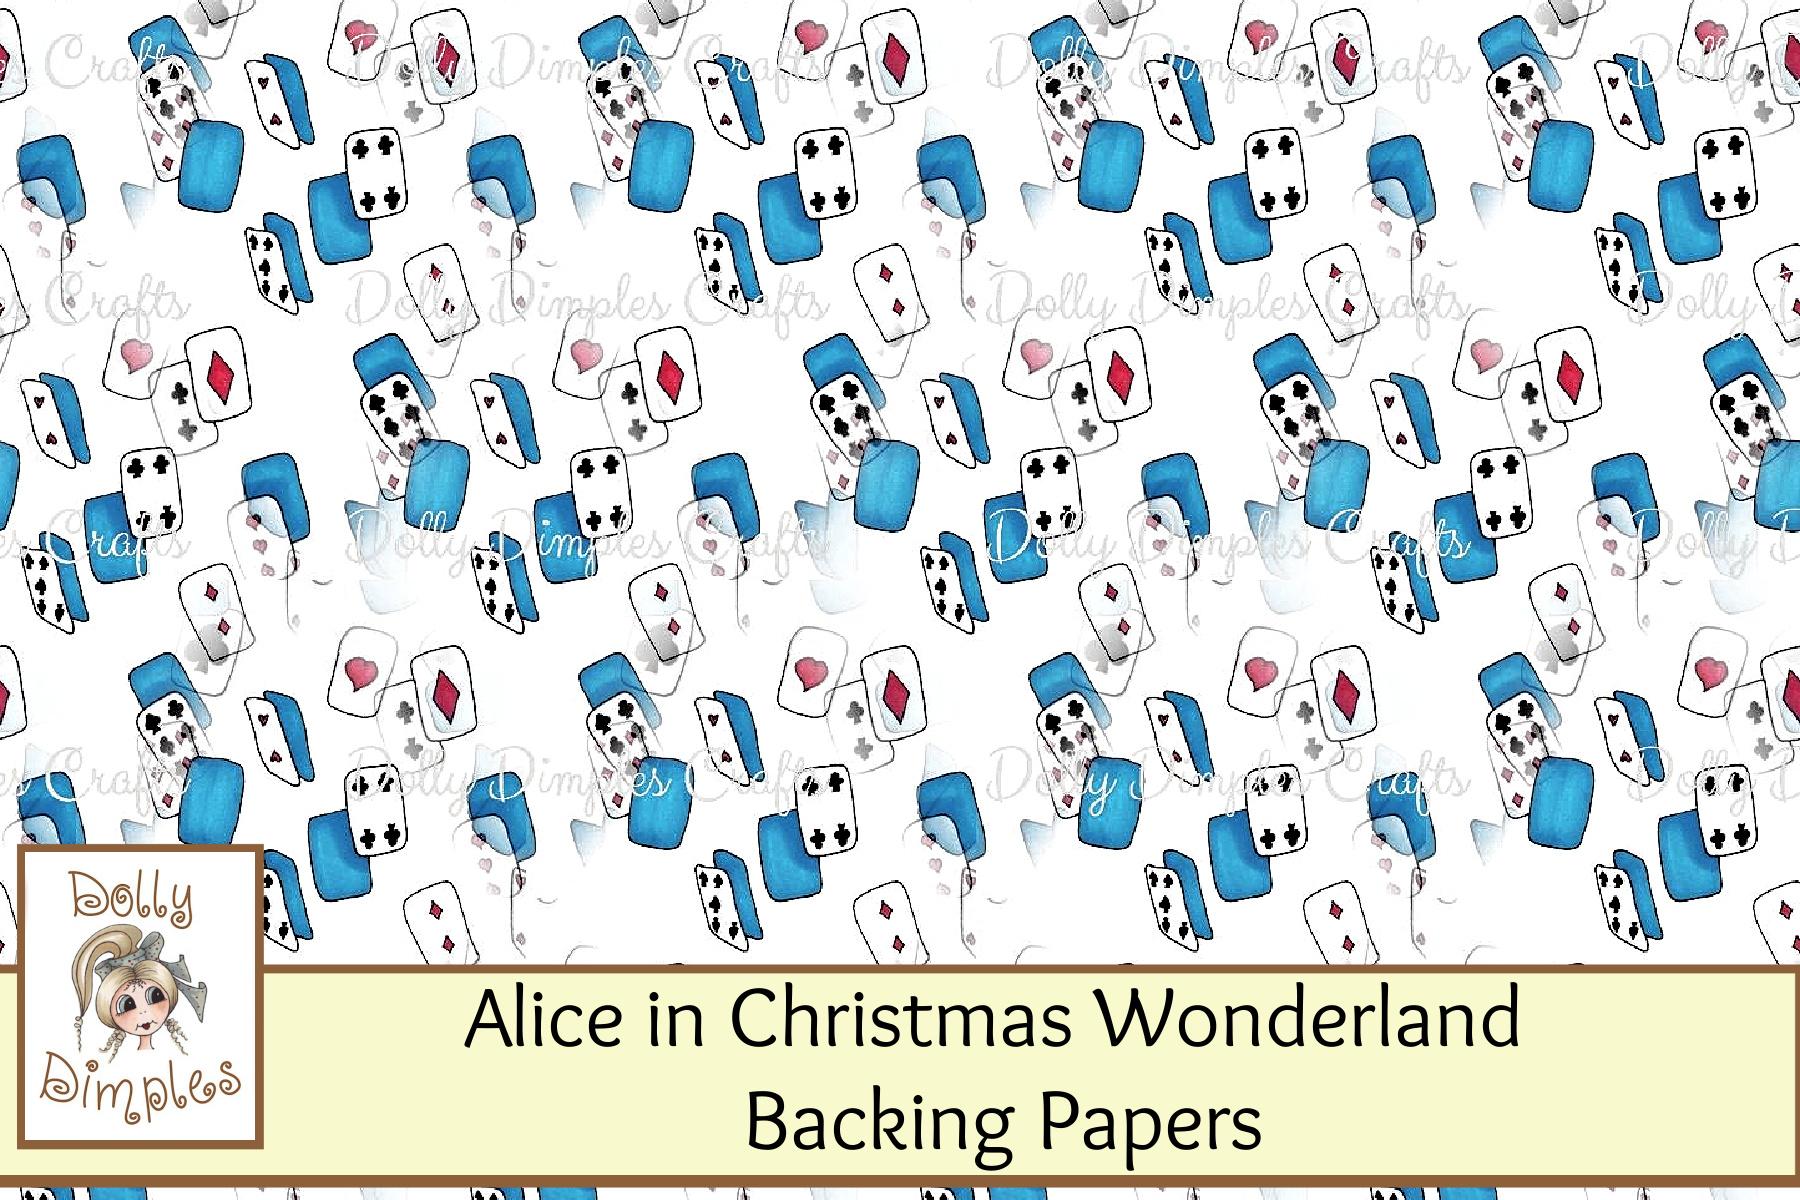 Alice in Christmas Wonderland Backing Papers